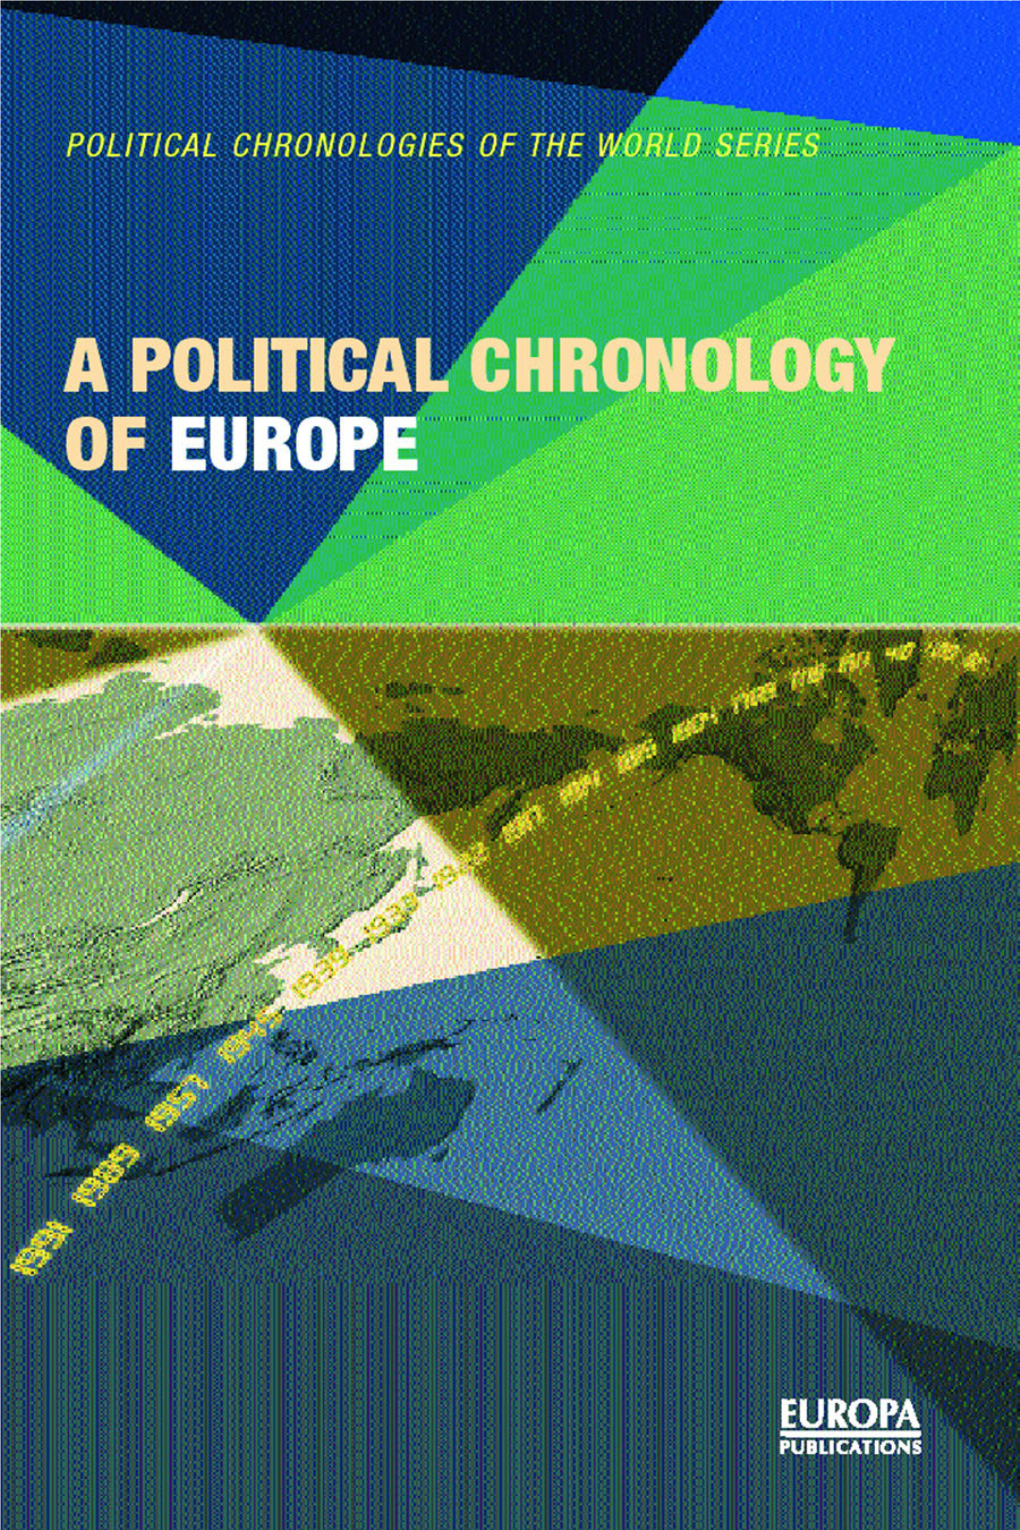 A Political Chronology of Europe